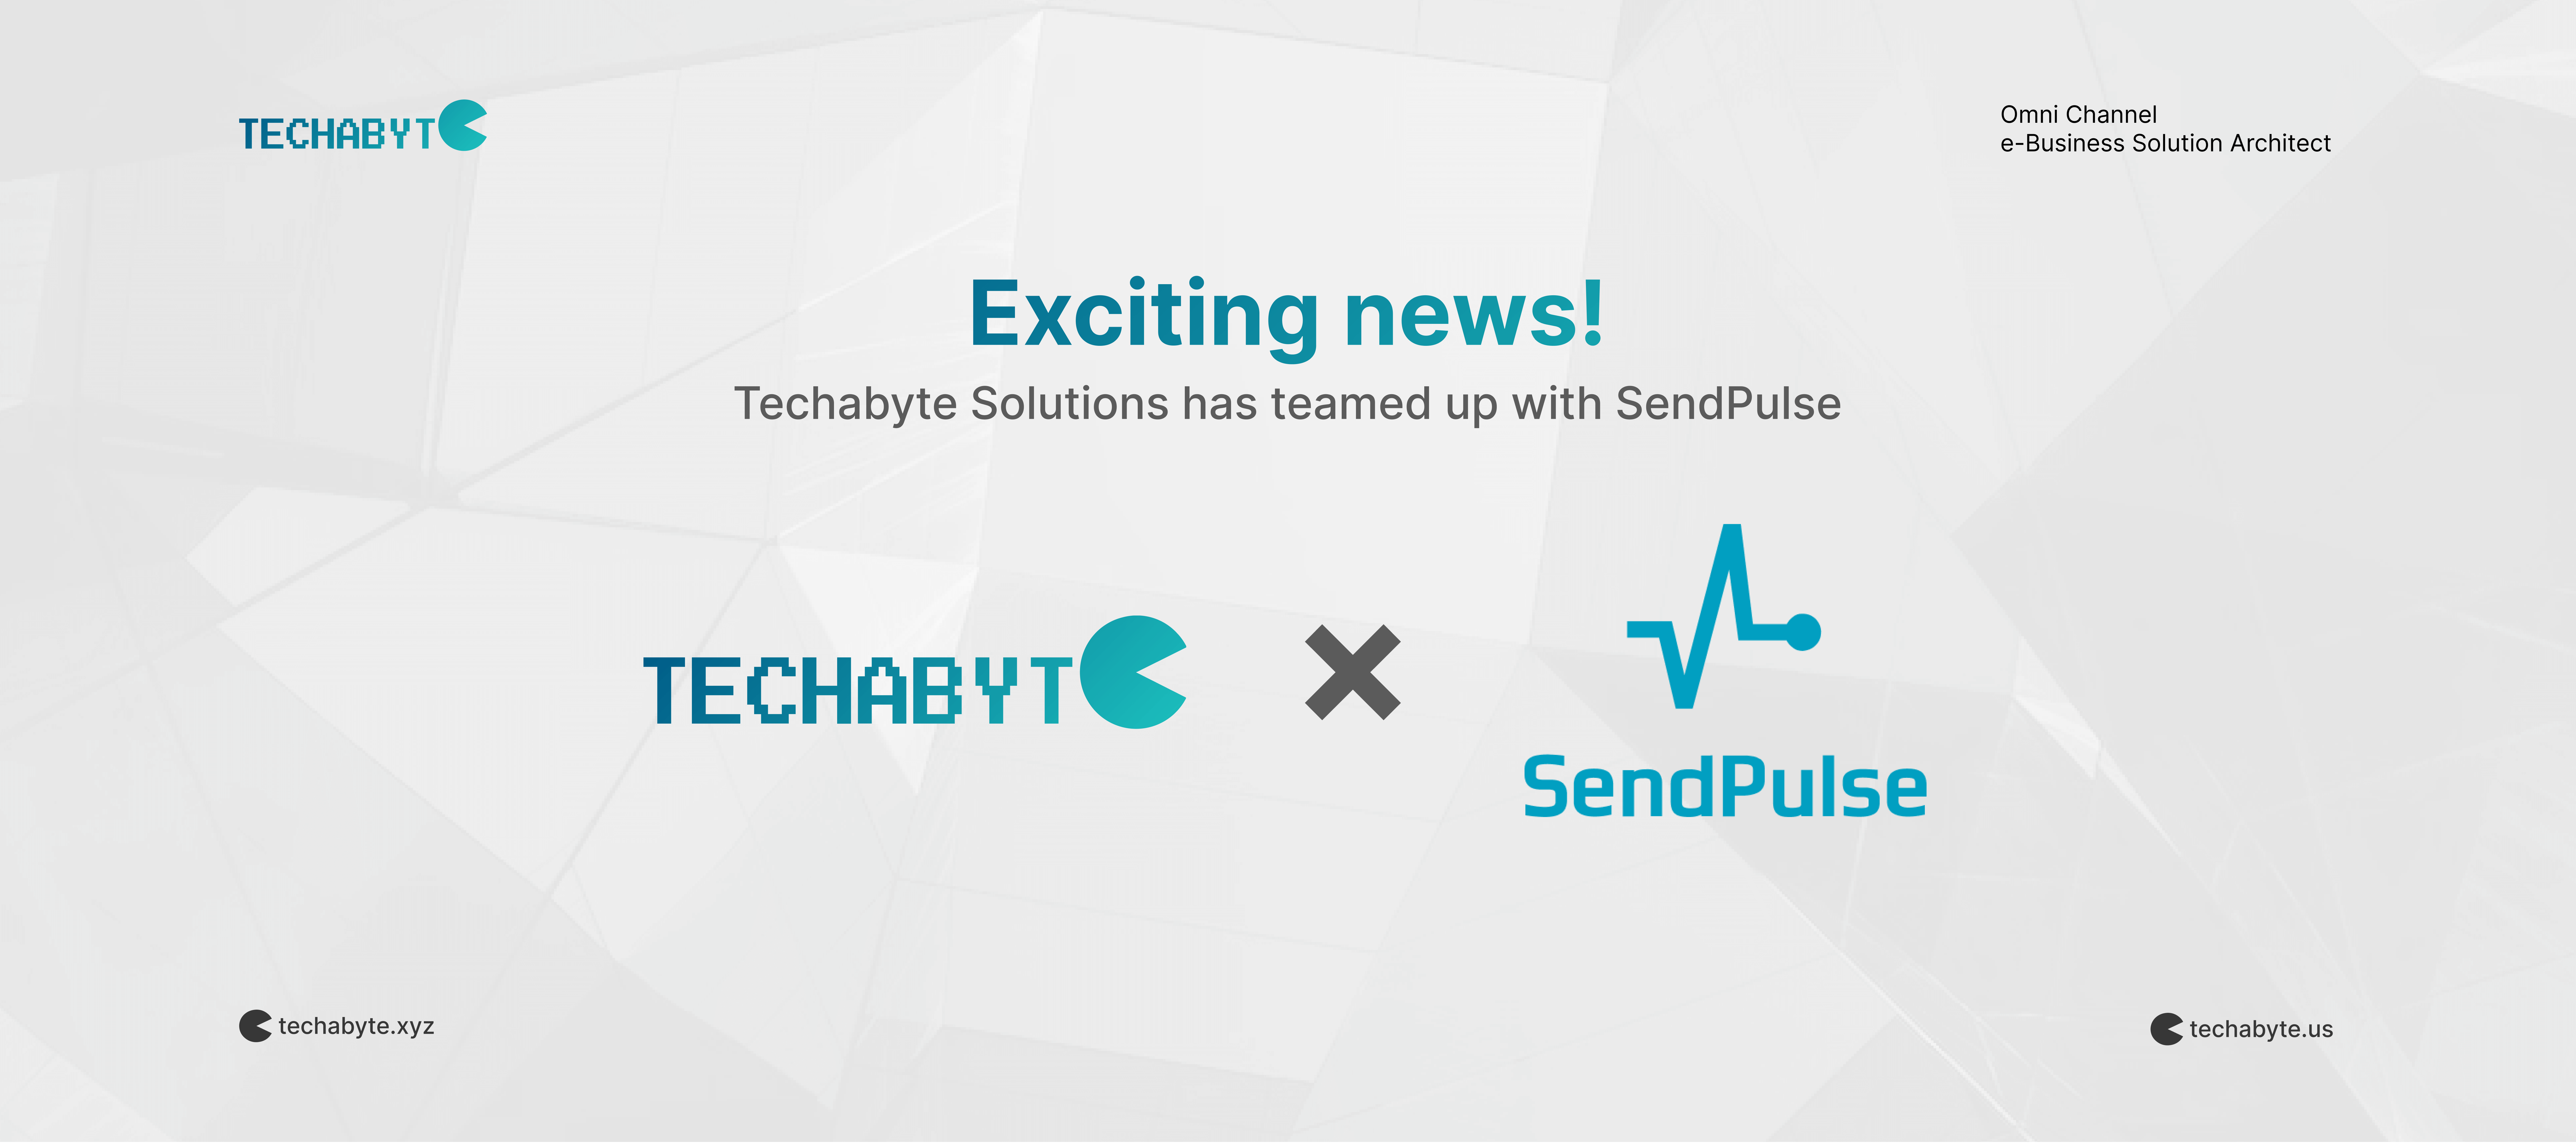 Marketing Experts Unite: Techabyte Solutions Team Up with SendPulse to Rule Omnichannel e-business